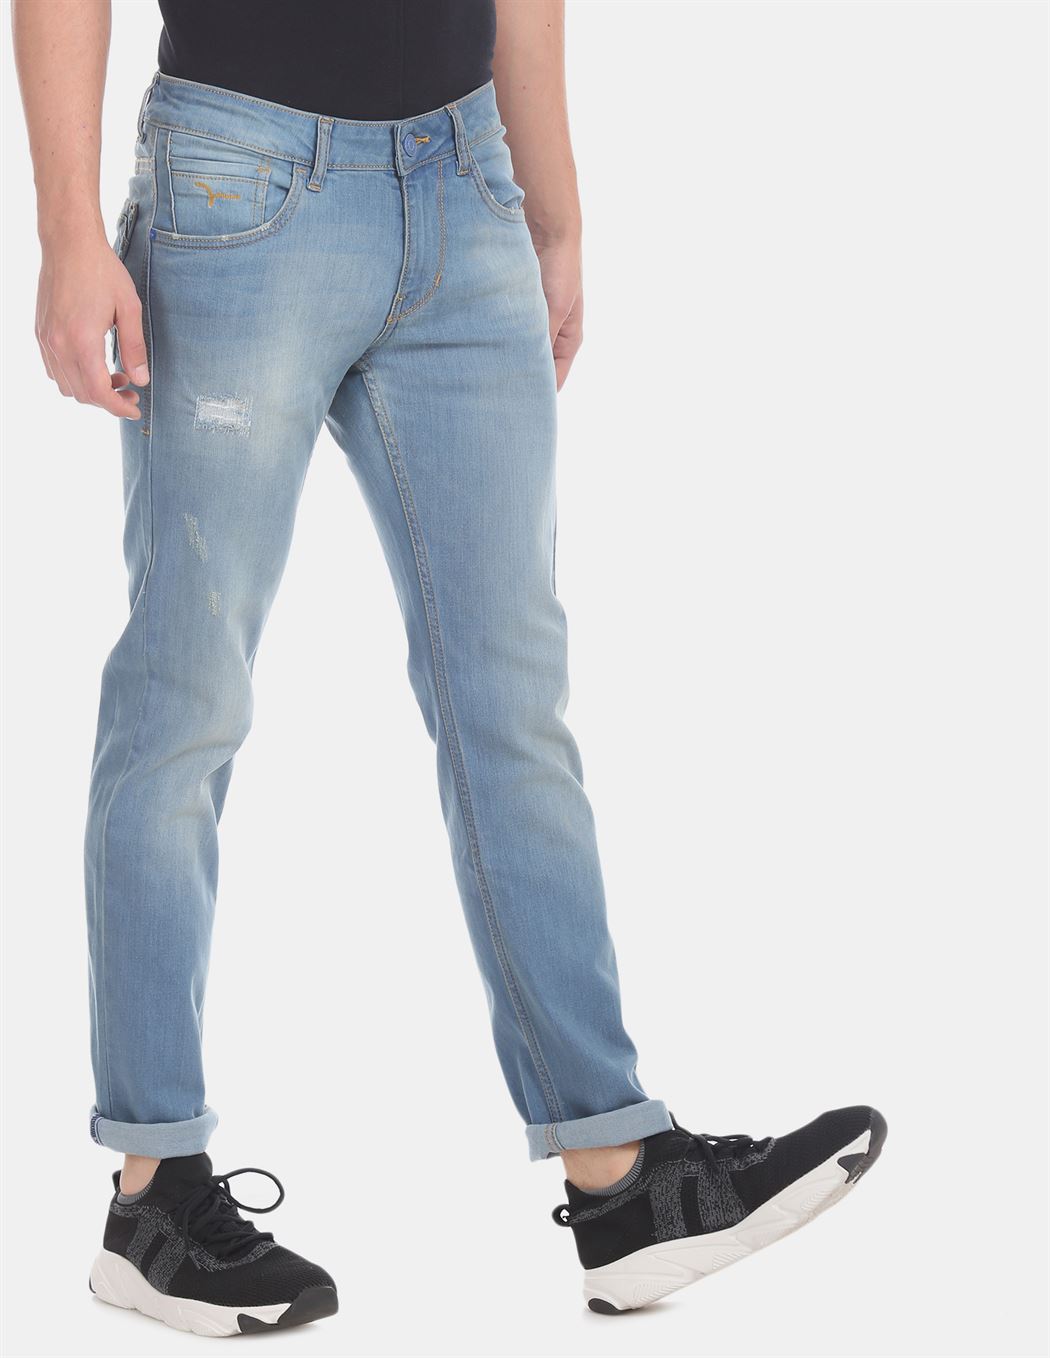 flying machine jeans